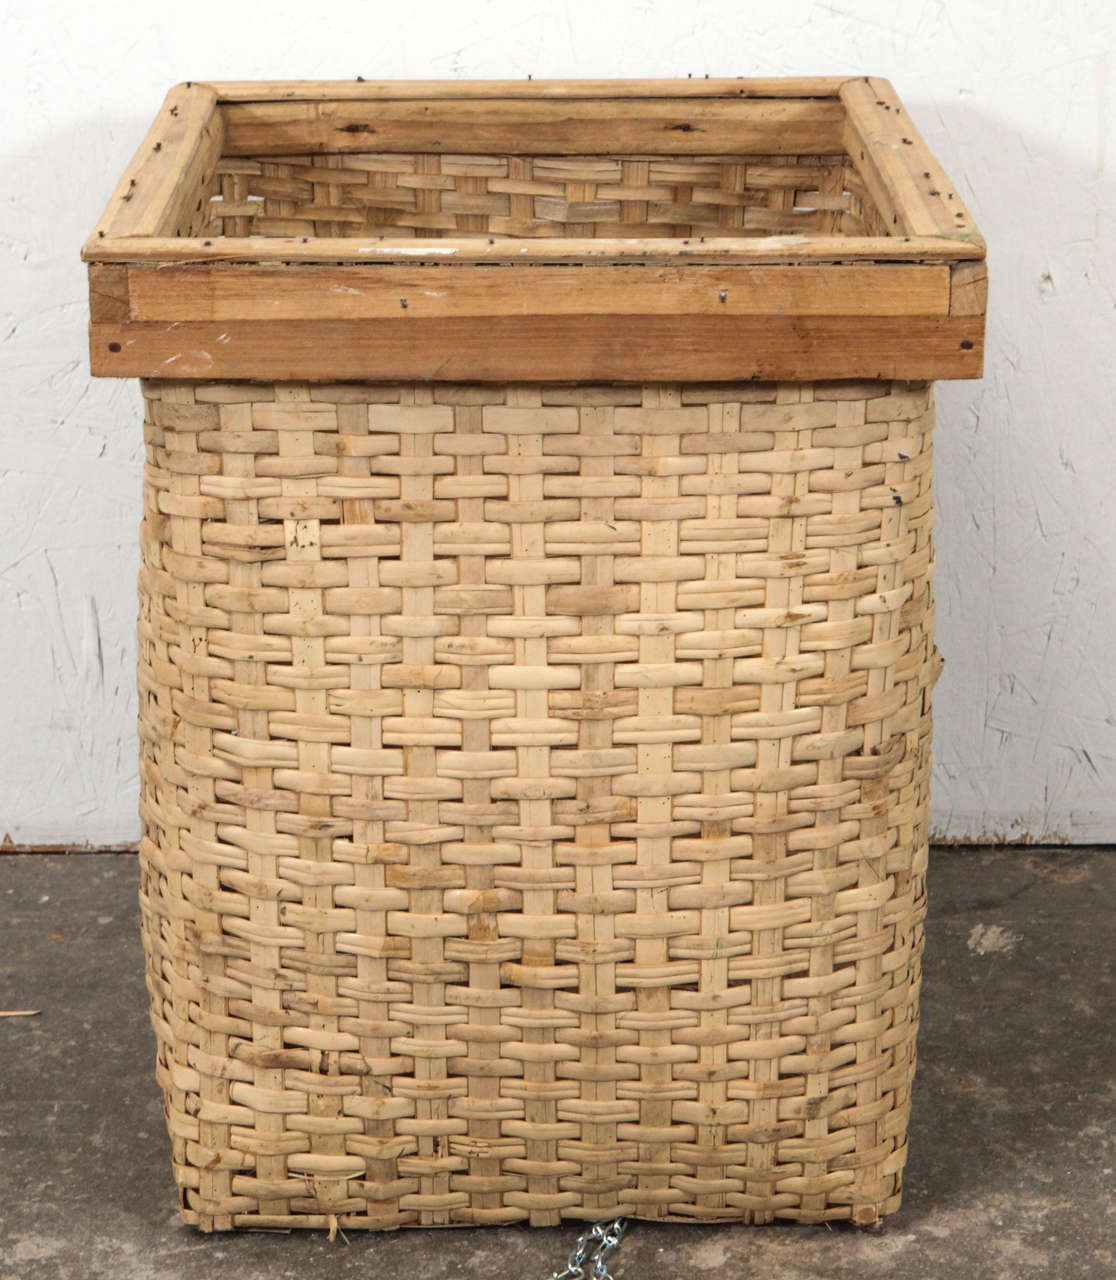 Rustic square wood and wicker basket.